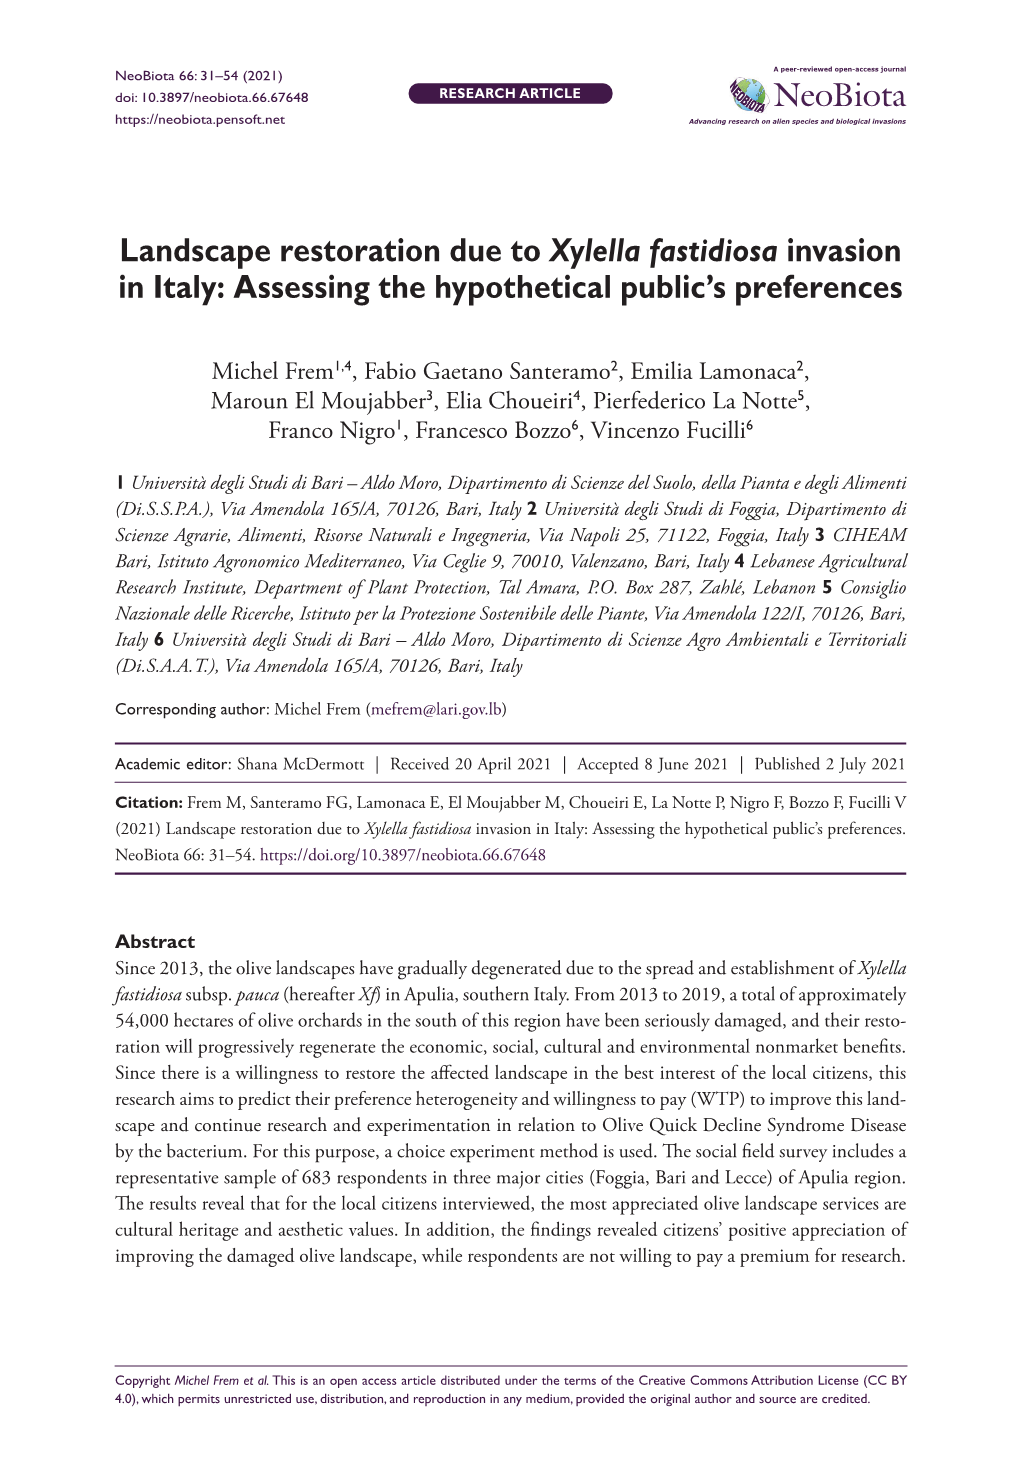 Landscape Restoration Due to Xylella Fastidiosa Invasion in Italy: Assessing the Hypothetical Public’S Preferences